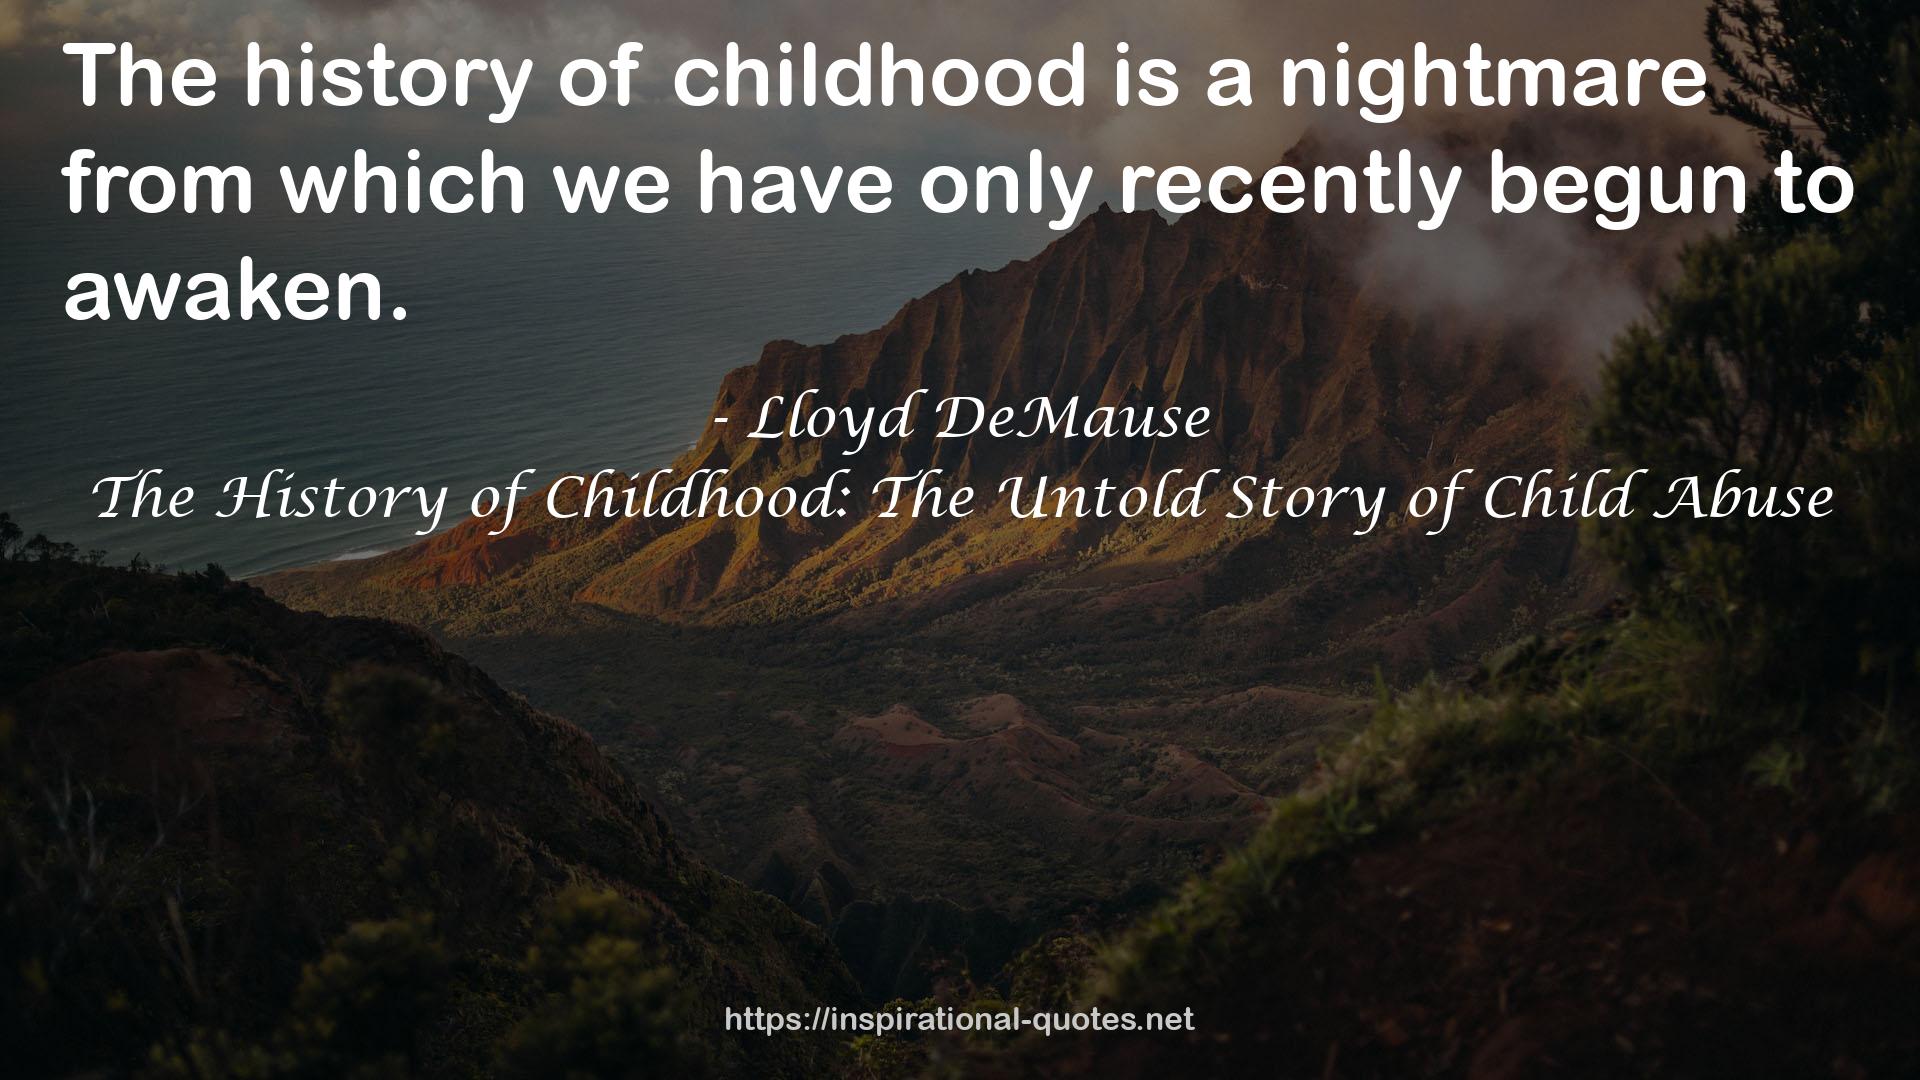 The History of Childhood: The Untold Story of Child Abuse QUOTES